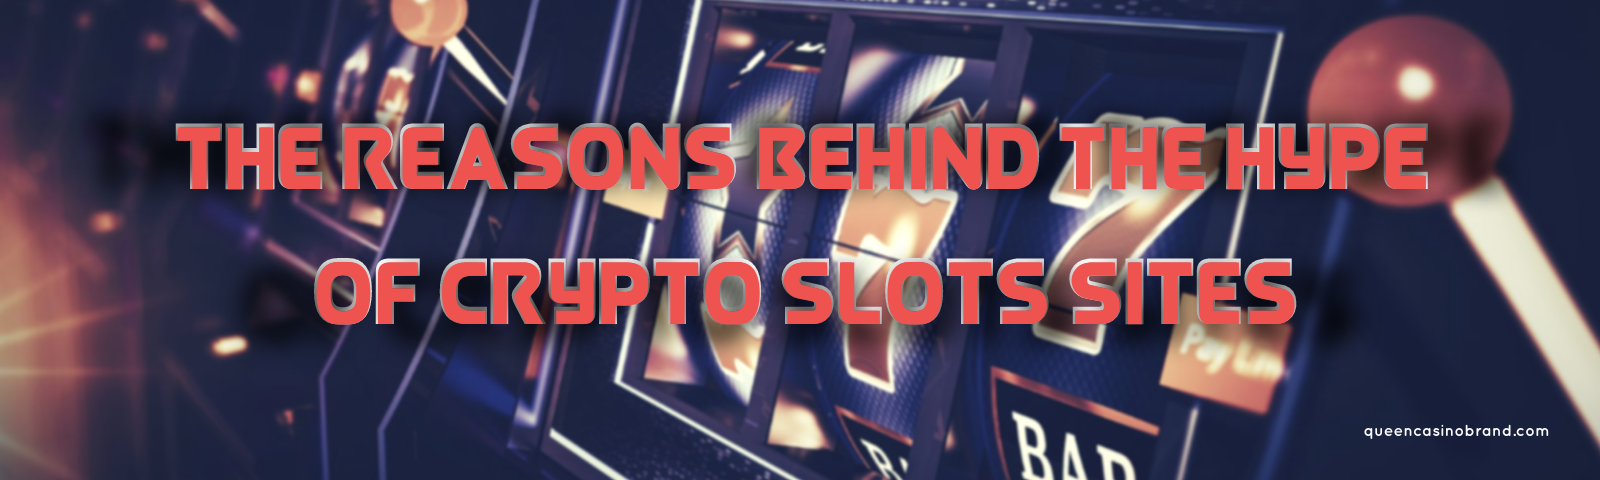 The Reasons Behind the Hype of Crypto Slots Sites | Queen Casino Brand